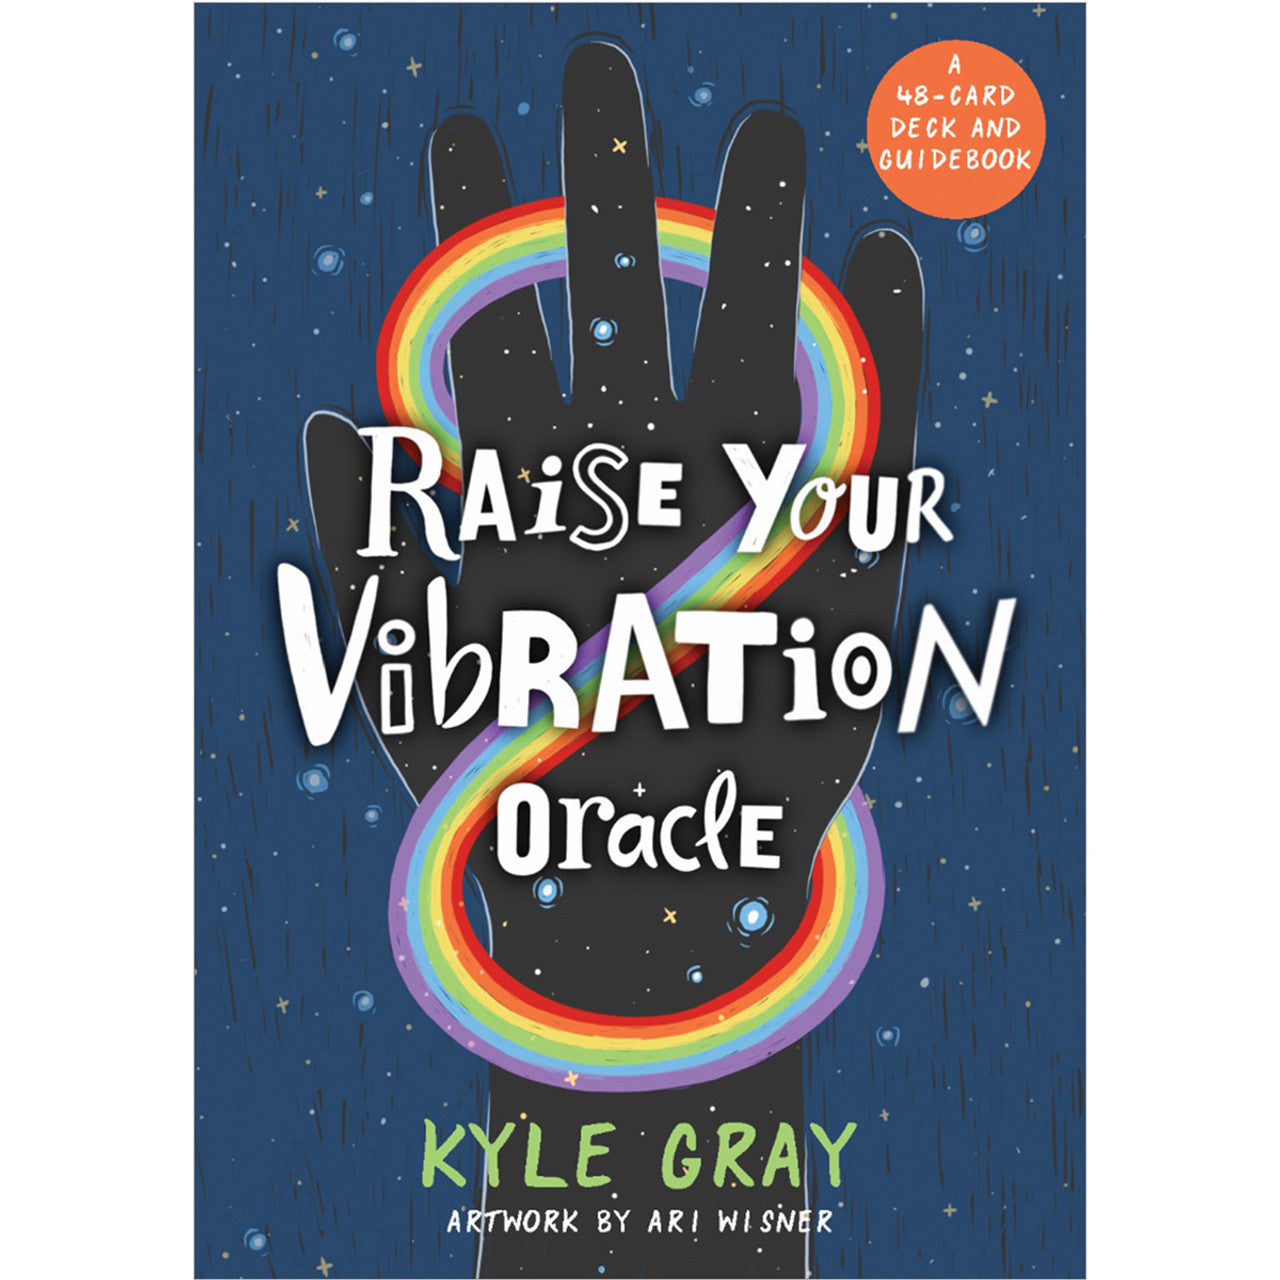 RAISE YOUR VIBRATION ORACLE BY KYLE GRAY